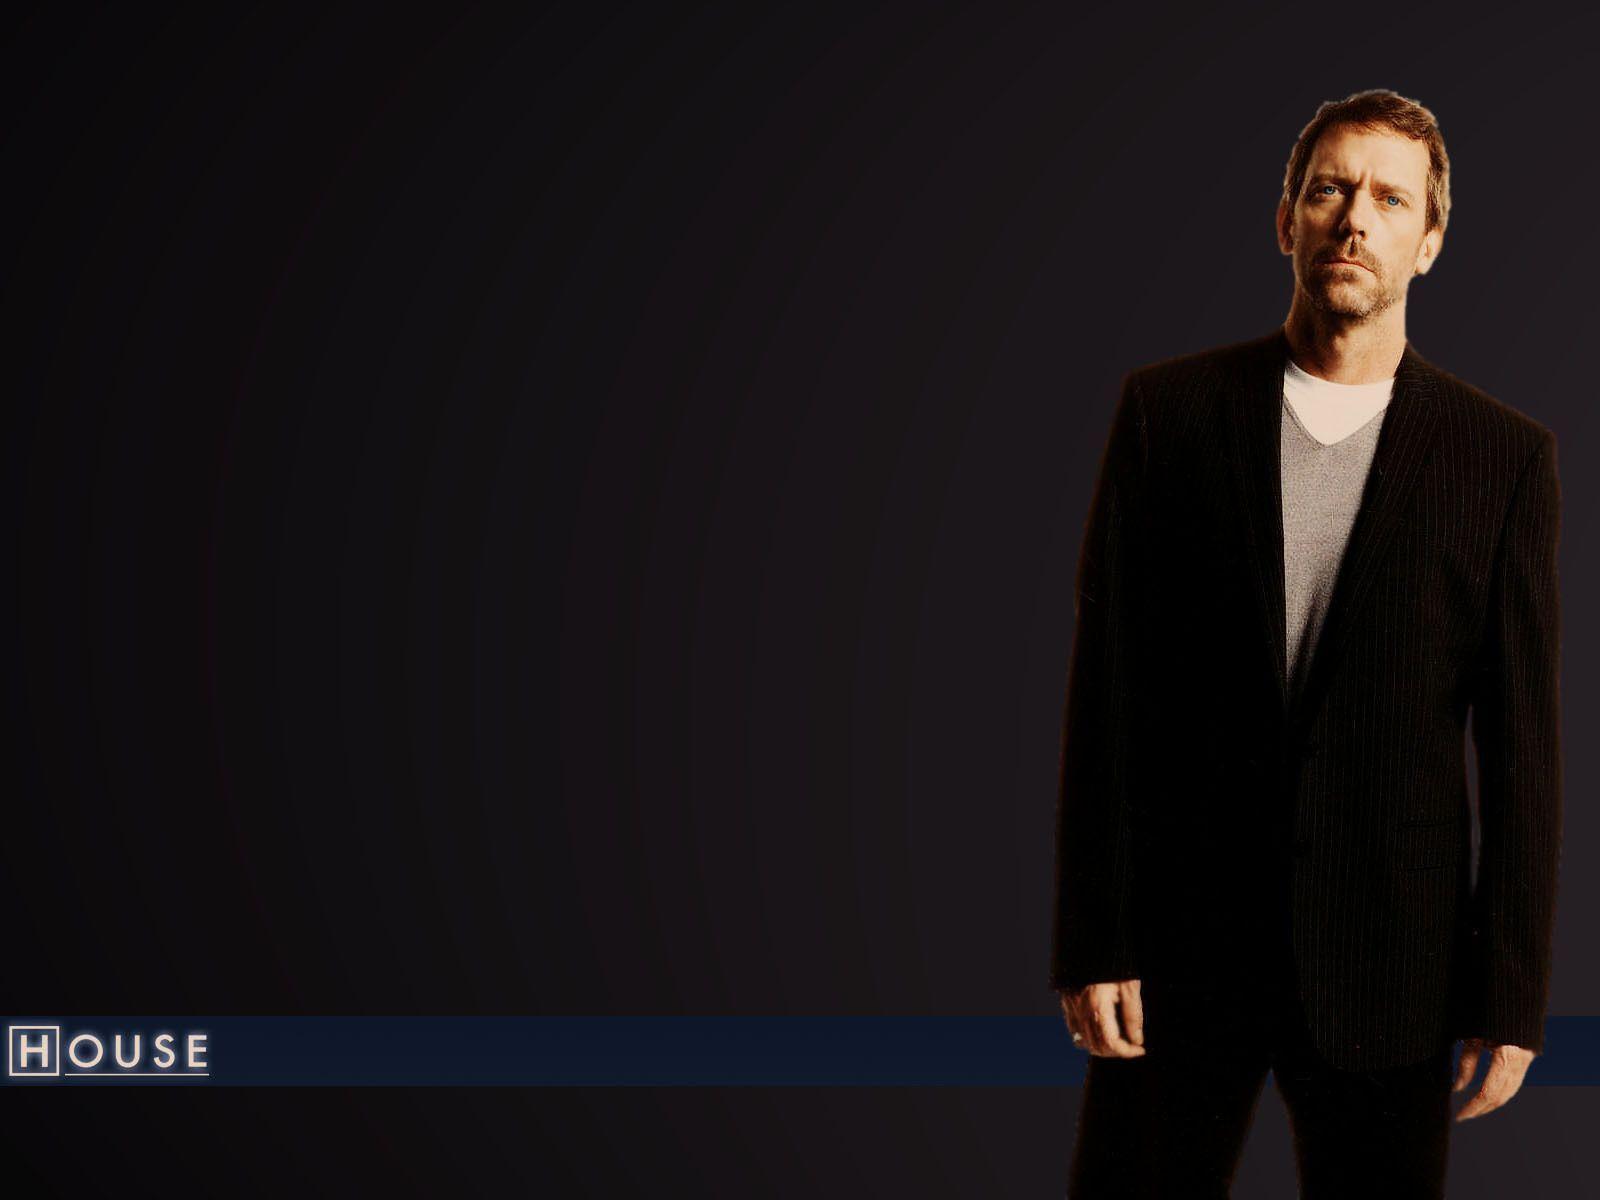 House md wallpapers